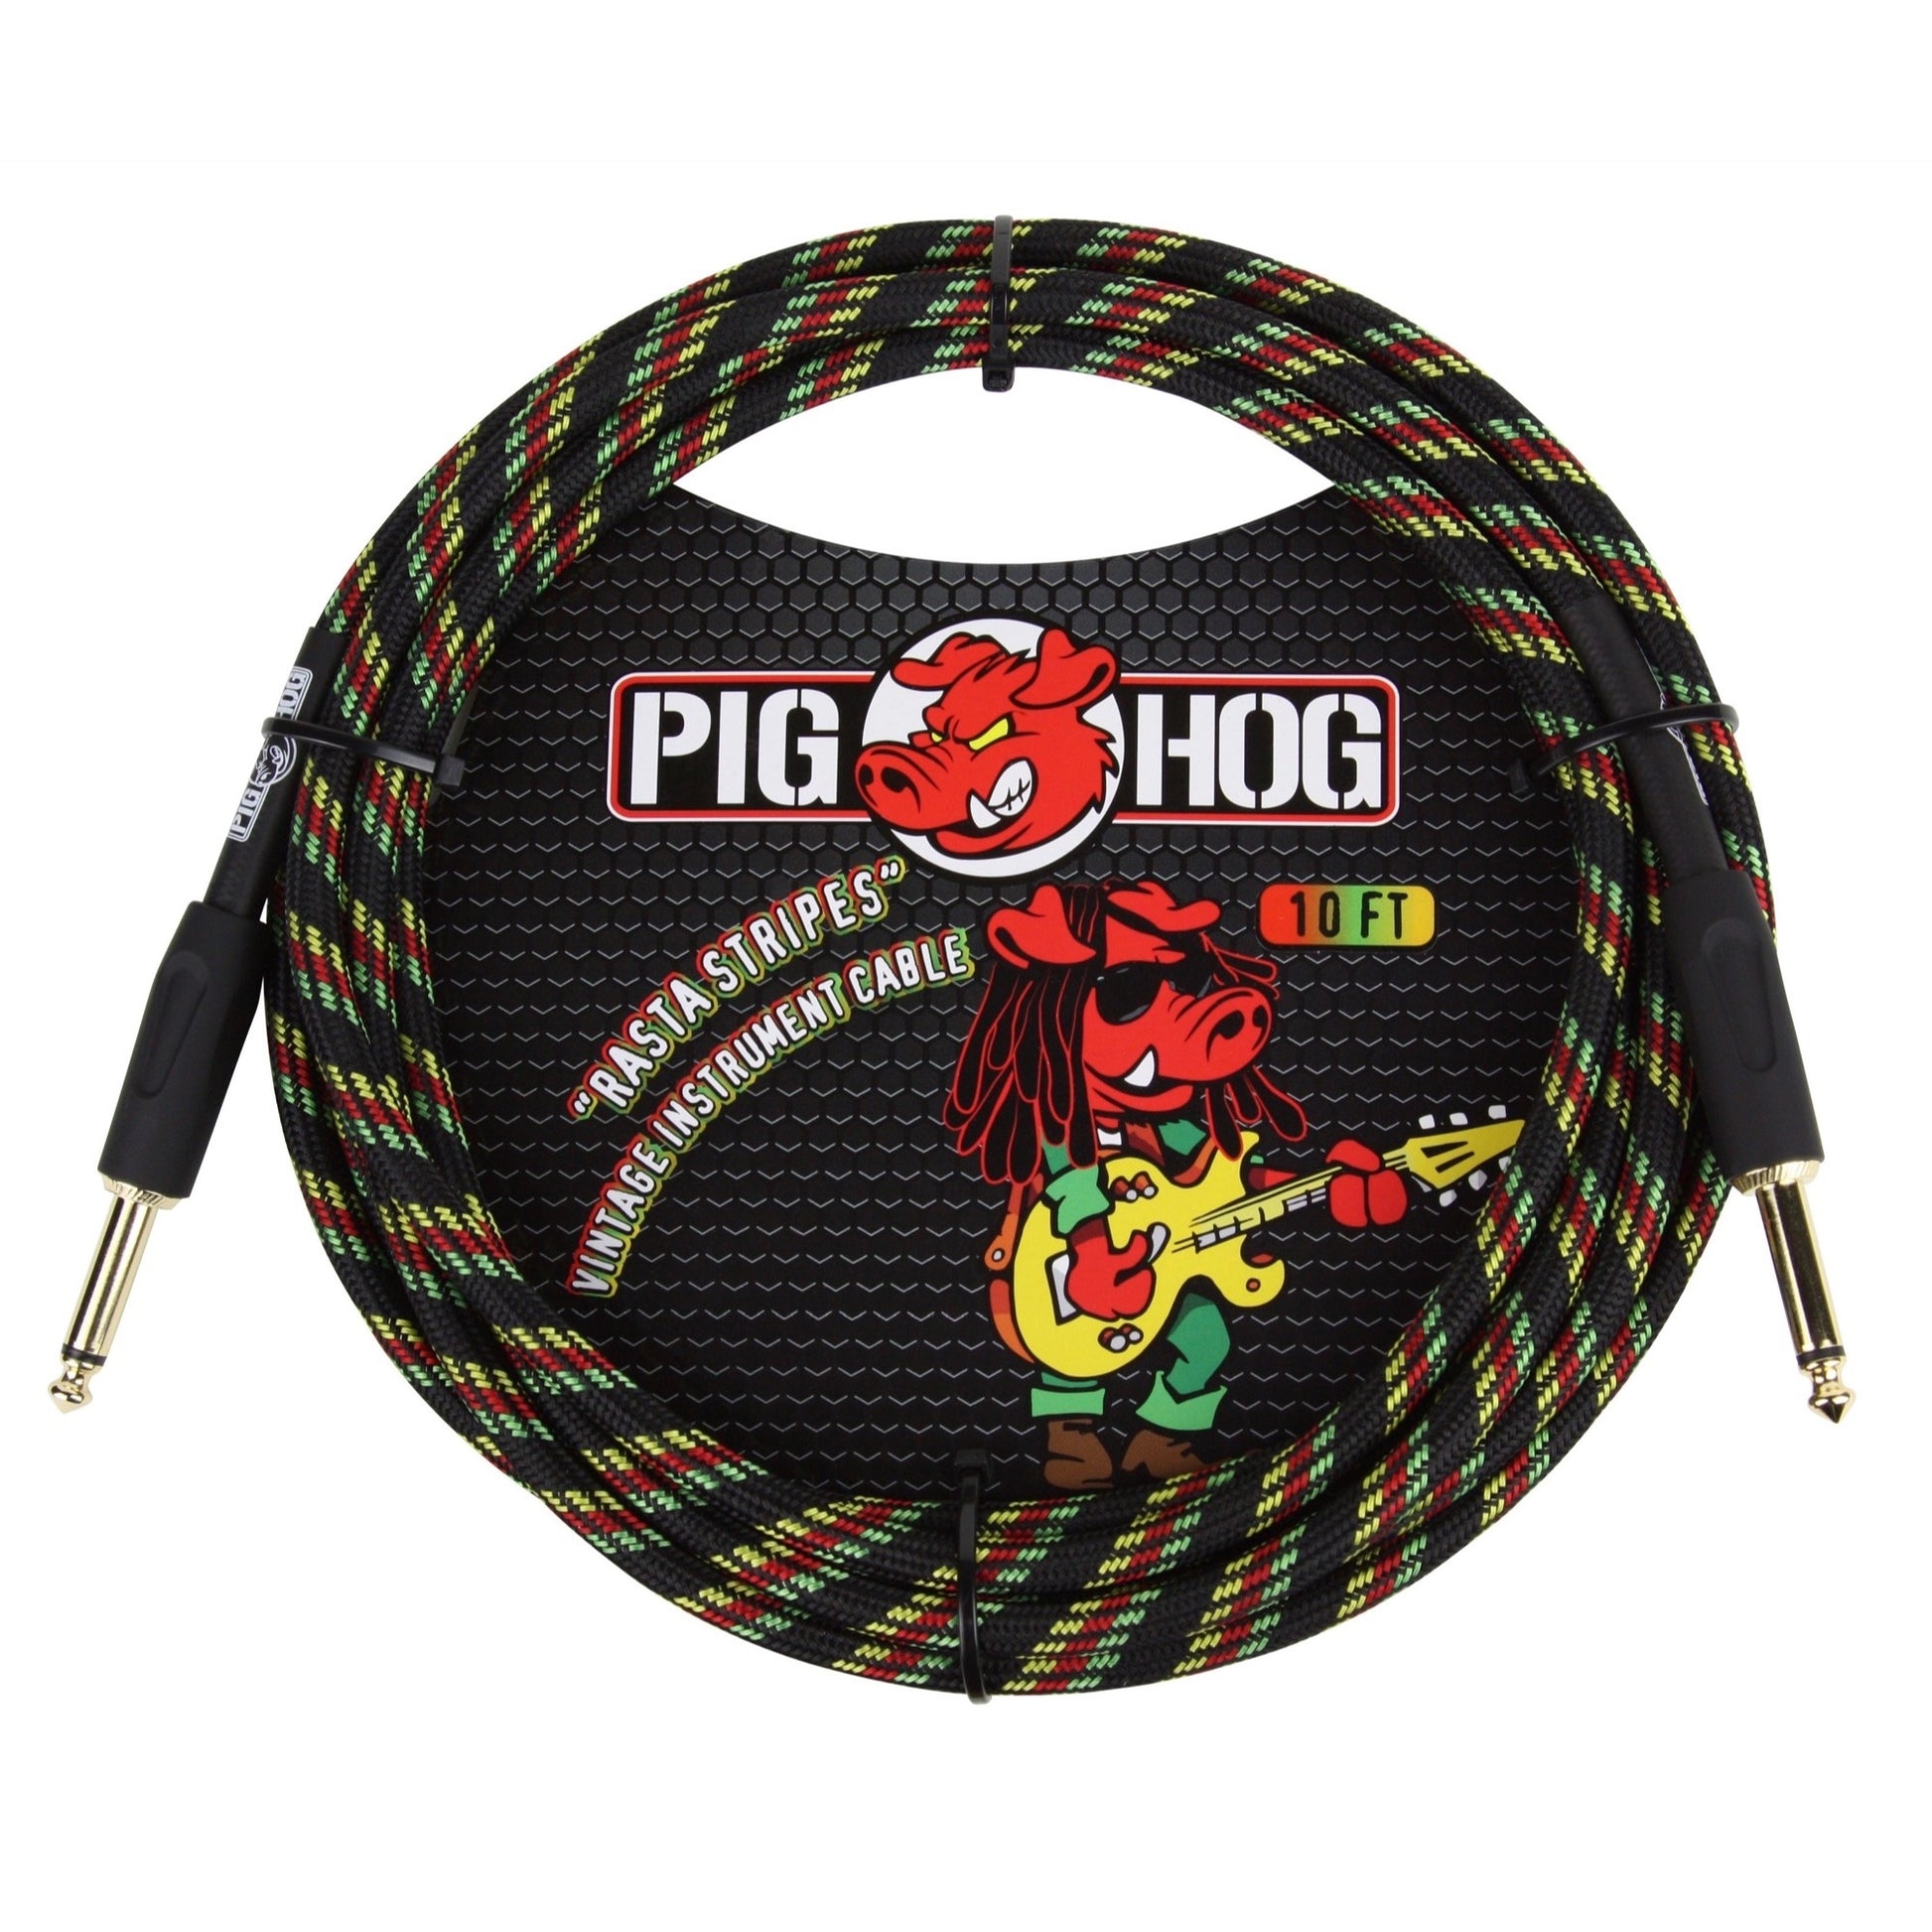 Pig Hog Vintage Series Instrument Cable, 1/4 Inch Straight to 1/4 Inch Straight, Rasta Stripes, 10 Foot